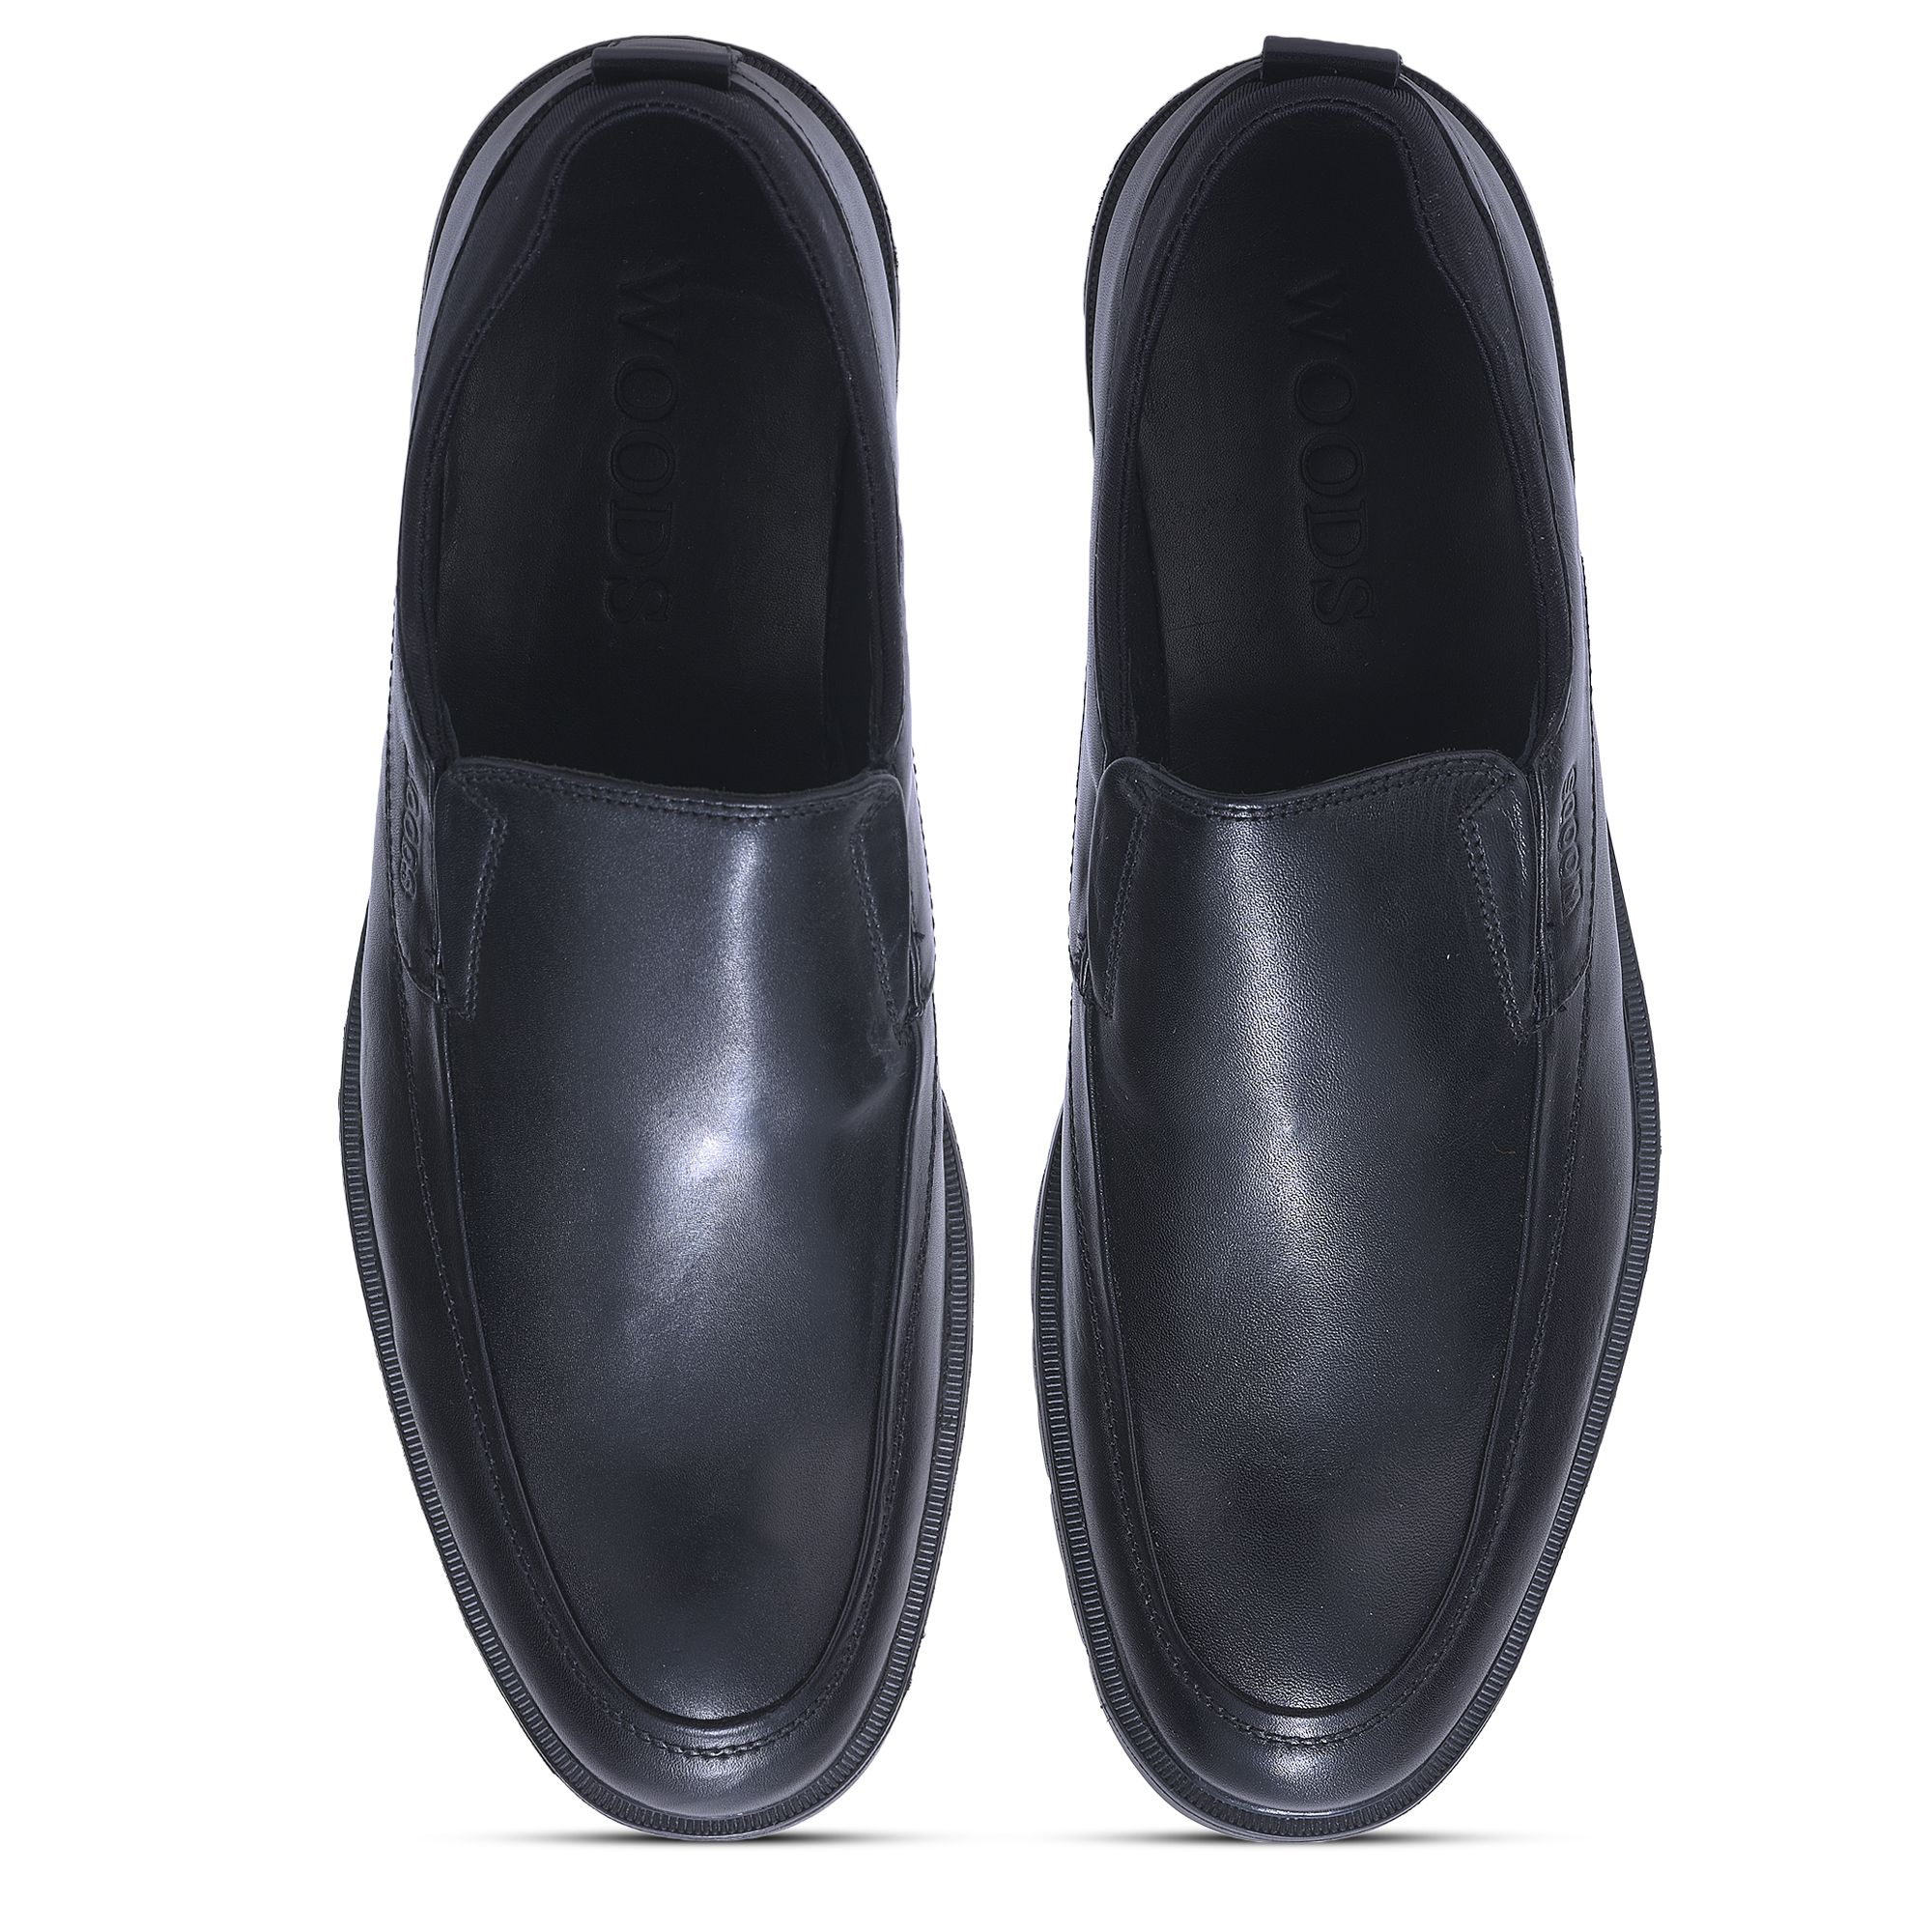 black slip on shoes 3 597 mrp 5 995 40 % off prices include taxes color ...